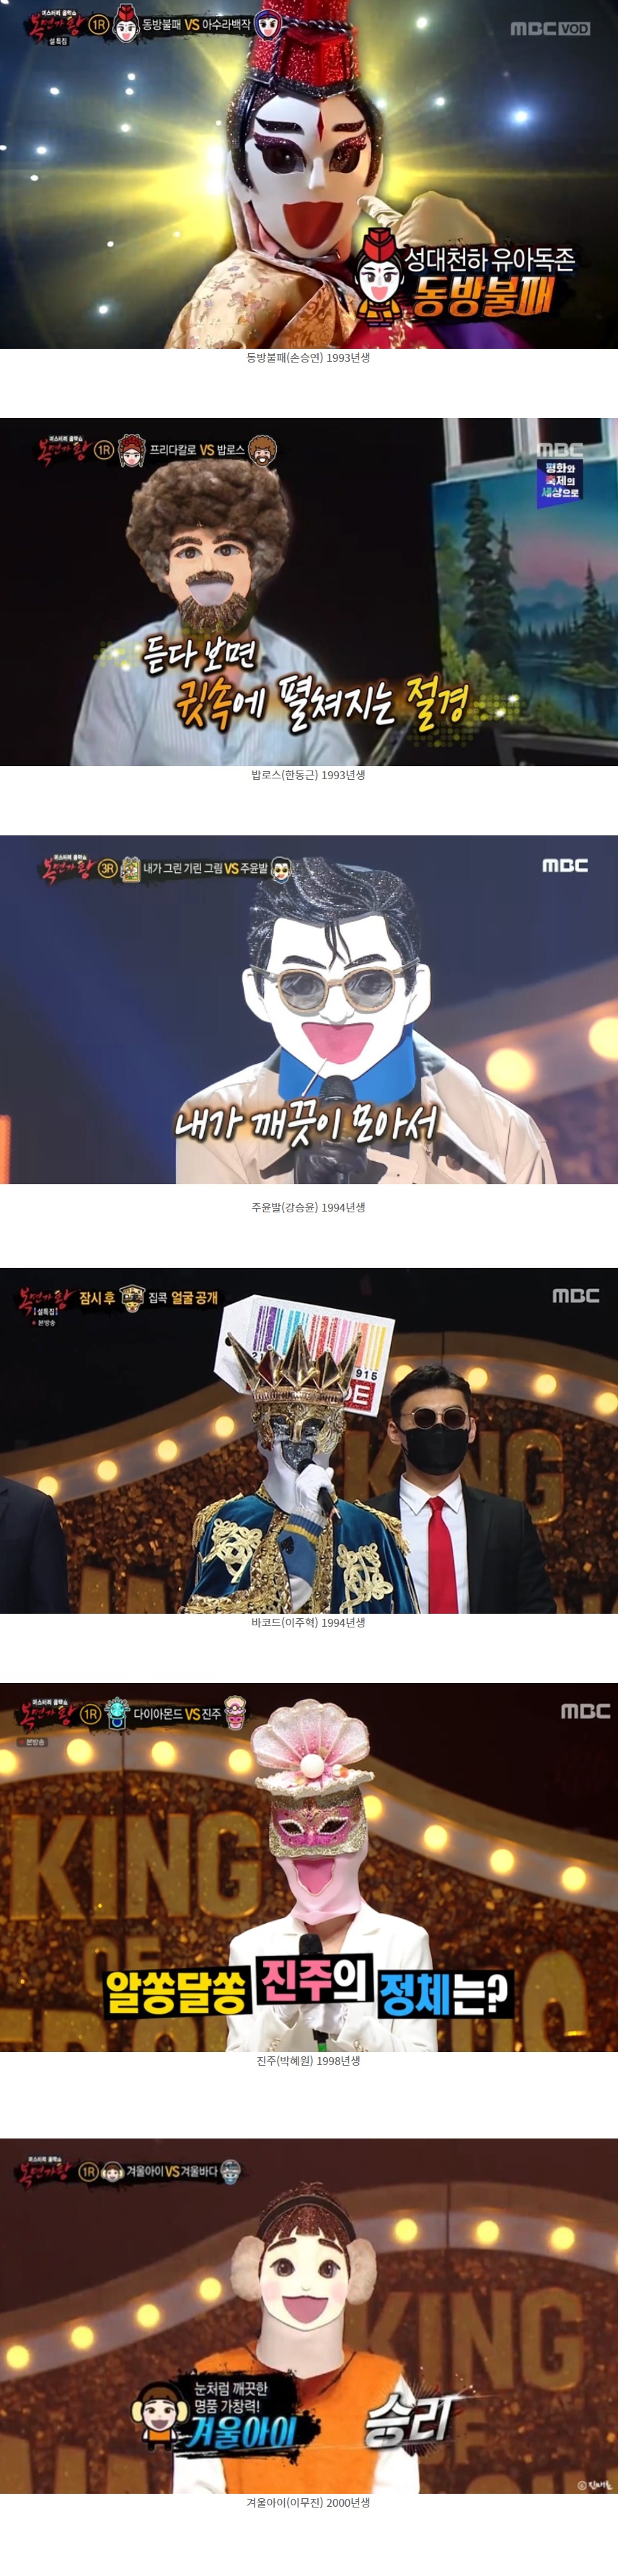 Who is the youngest masked singer?